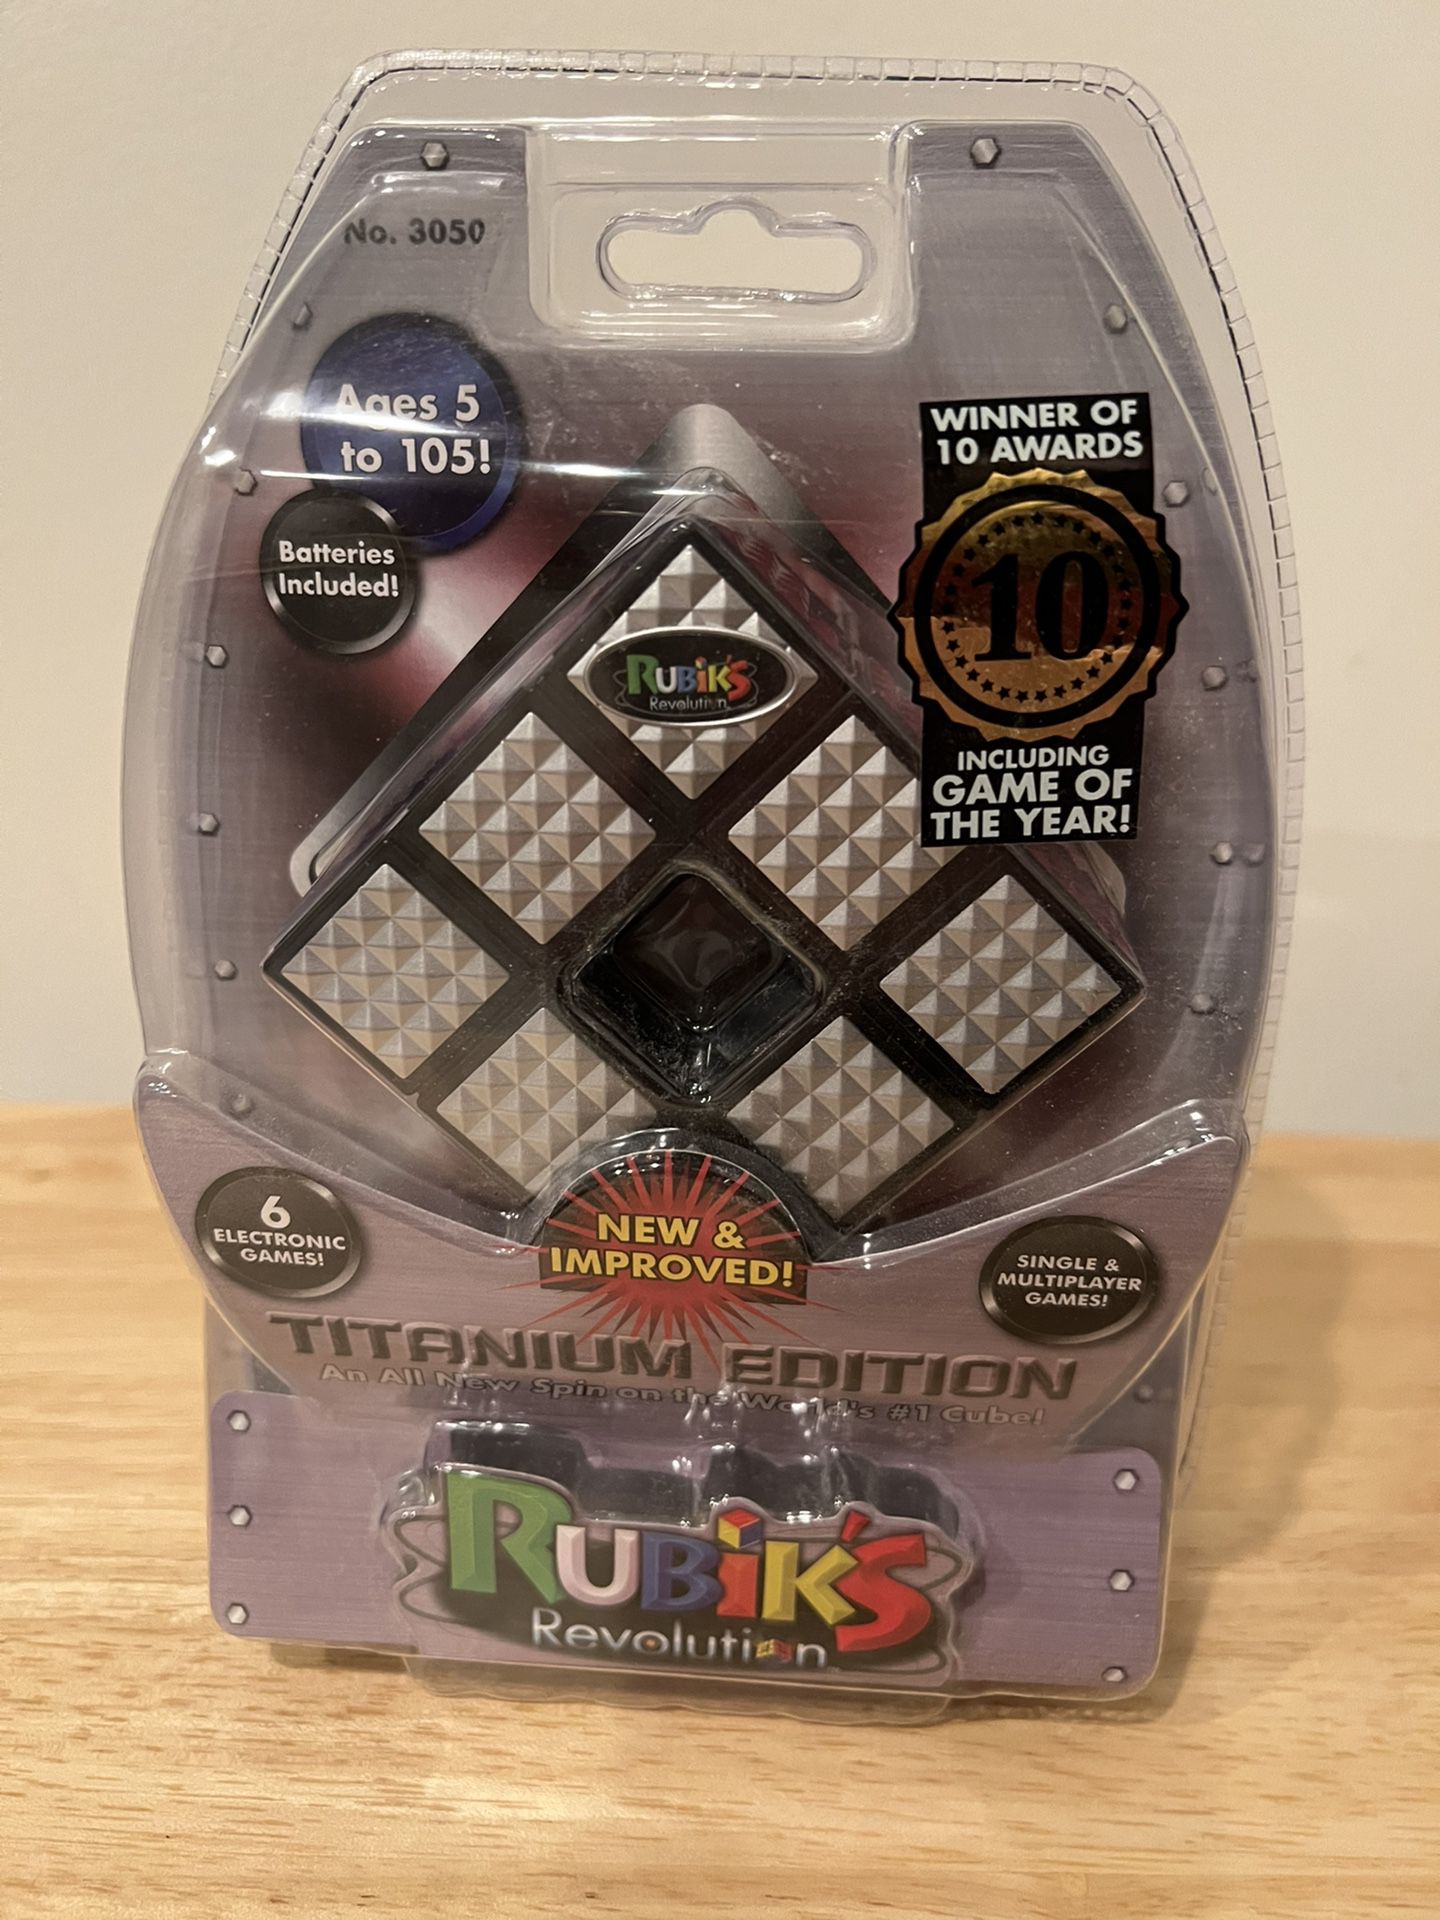 Rubik’s Revolution Titanium Edition  Electronic Games for Single and Multiplayer Brand New - Never Used or Tested - Smoke Free House Ages 5+